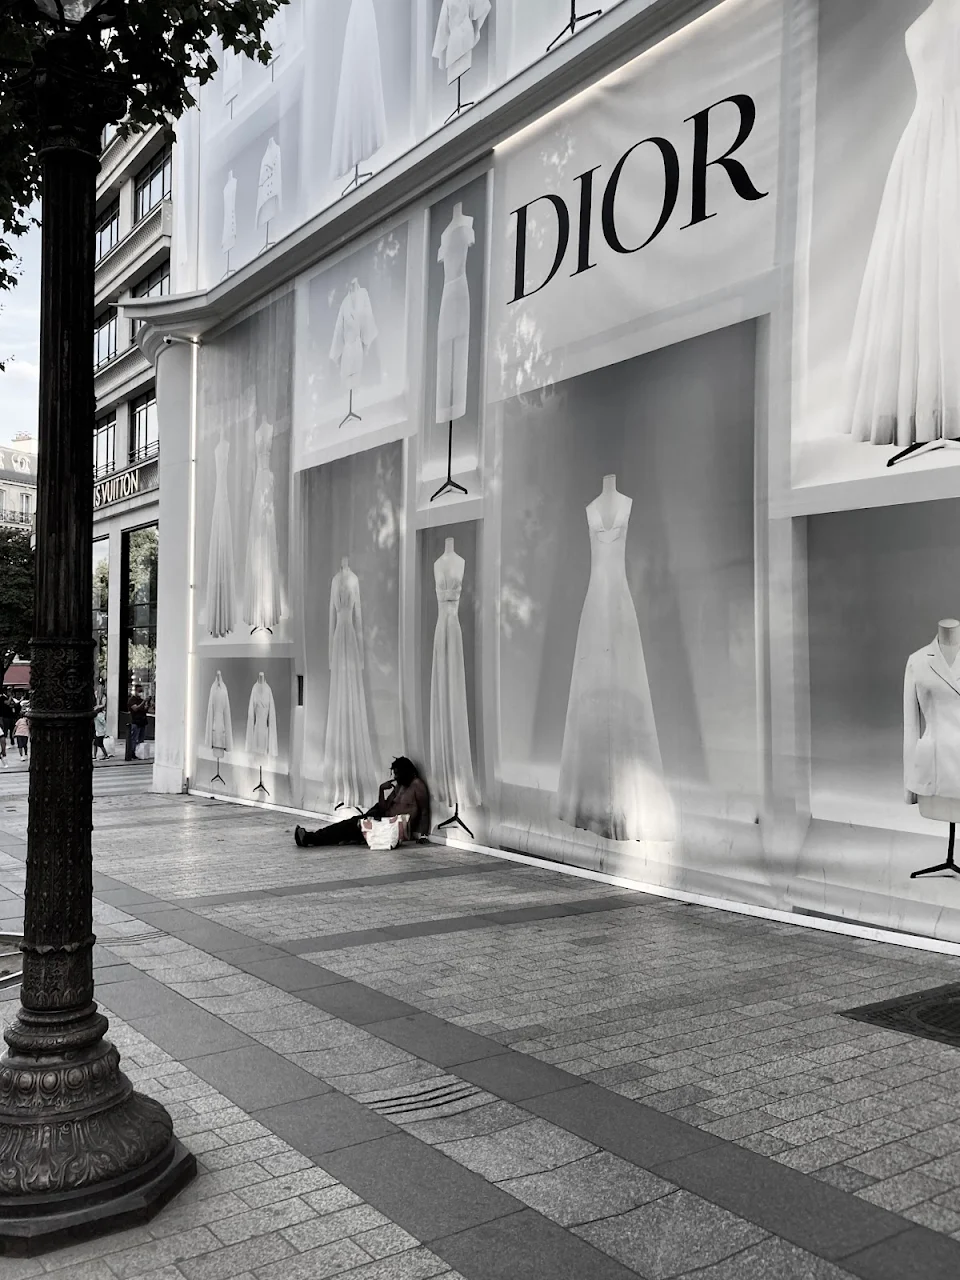 Homeless person in front of the Dior store in Paris today